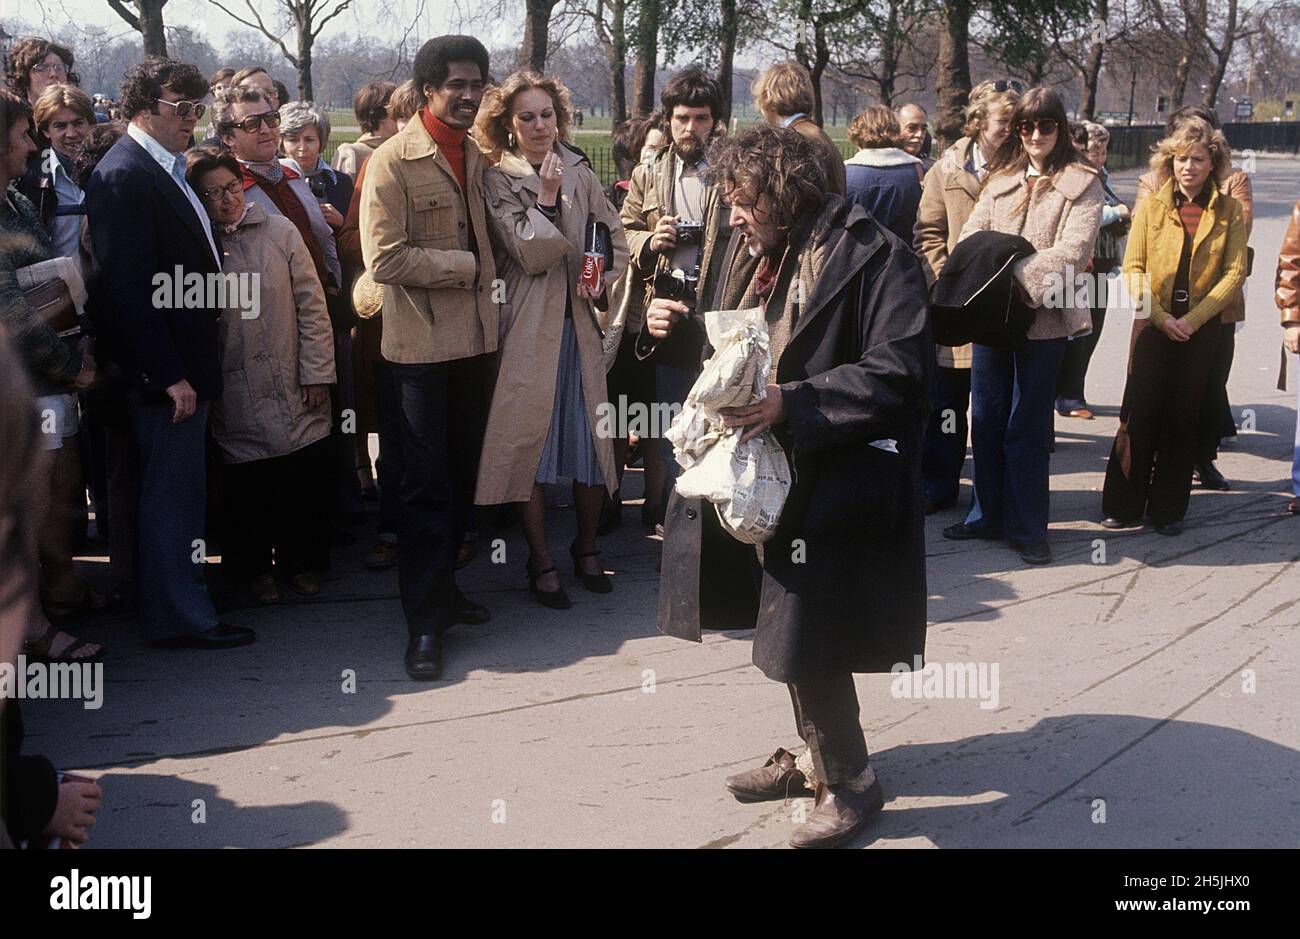 London 1982. A street view of a a seemingly drunken and homeless man who is performing something in front of a group of people. Credit Roland Palm. Stock Photo